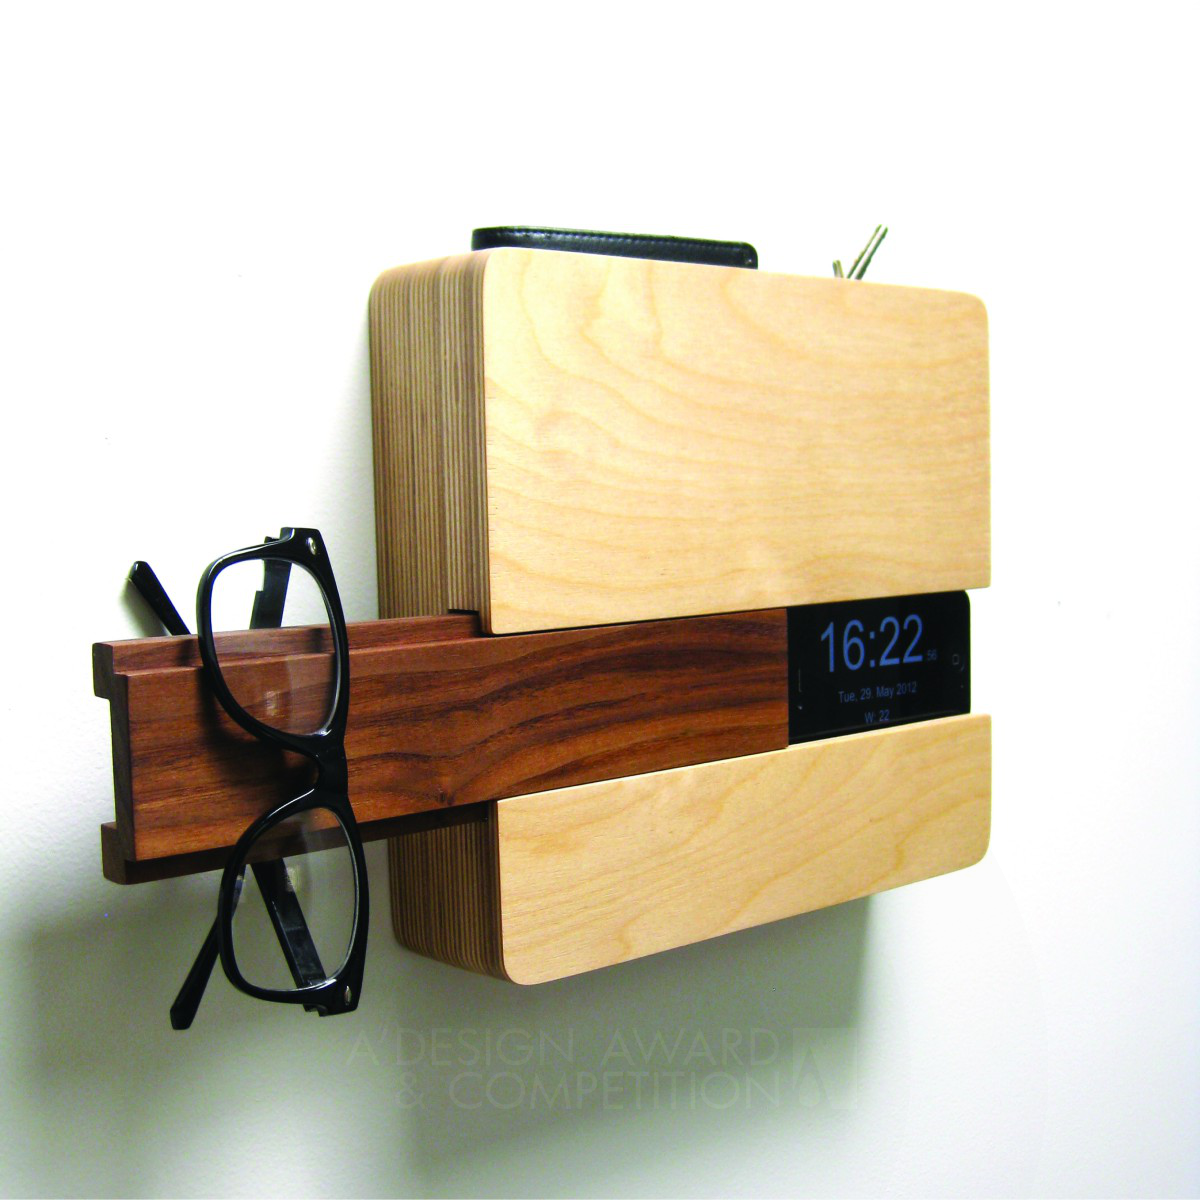 The Butler Home Organizer/Wall Clock by Curtis Micklish